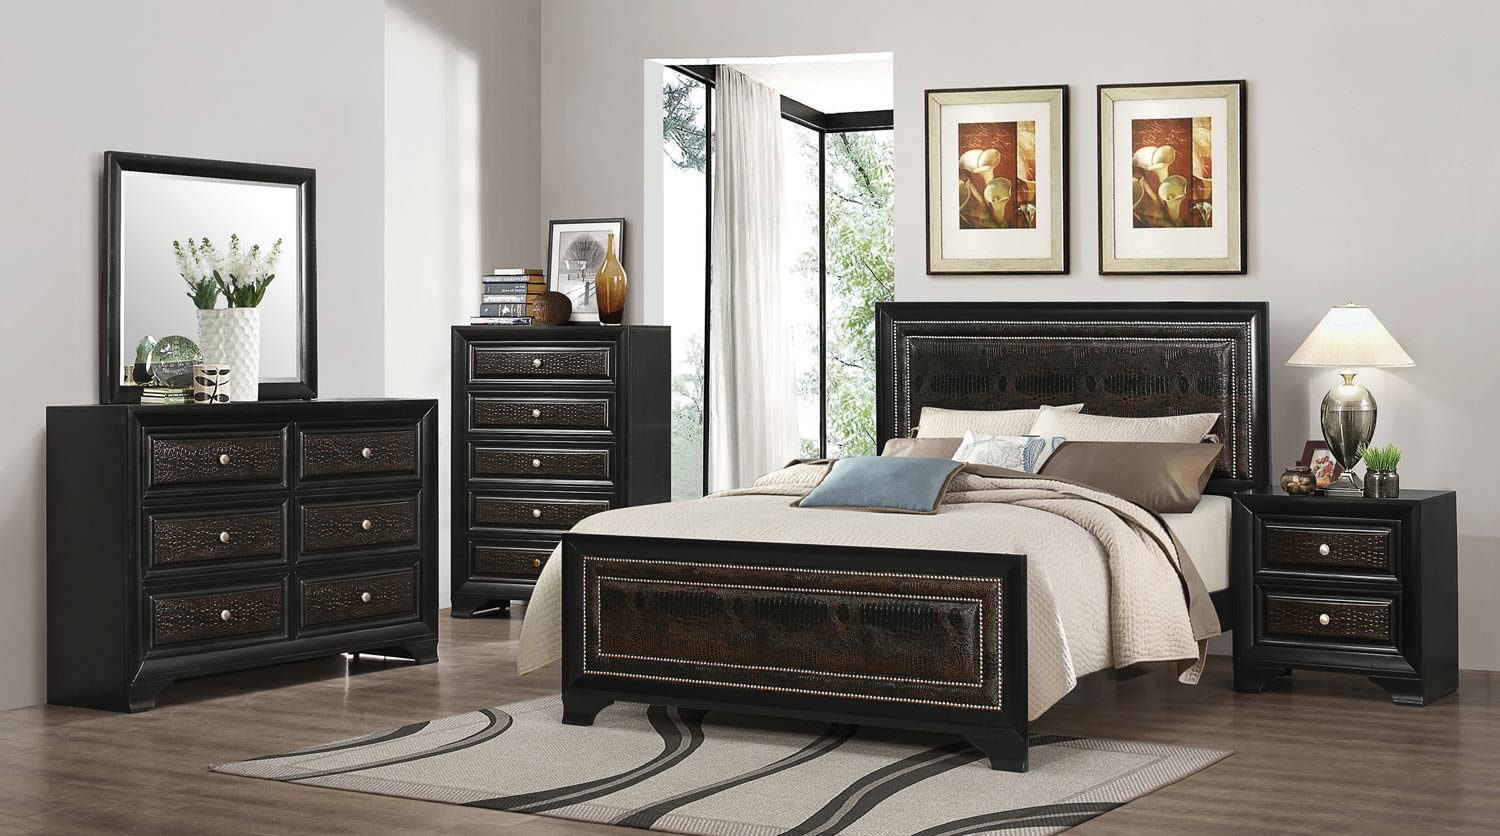 Coaster Delano Upholstered Bedroom Collection - Rubbed Black